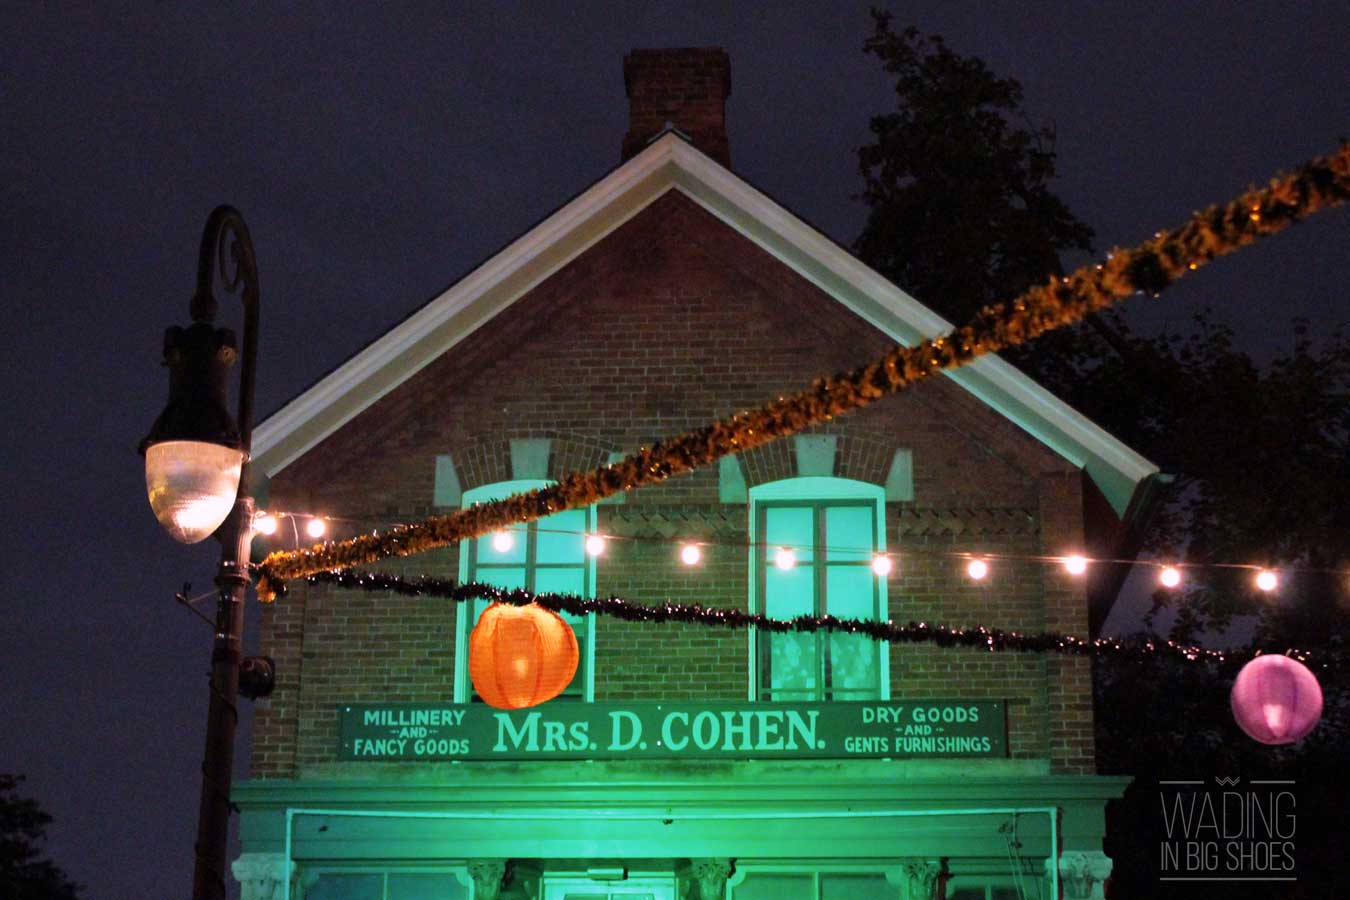 Hallowe'en in Greenfield Village Tips To Make The Most Of Your Visit